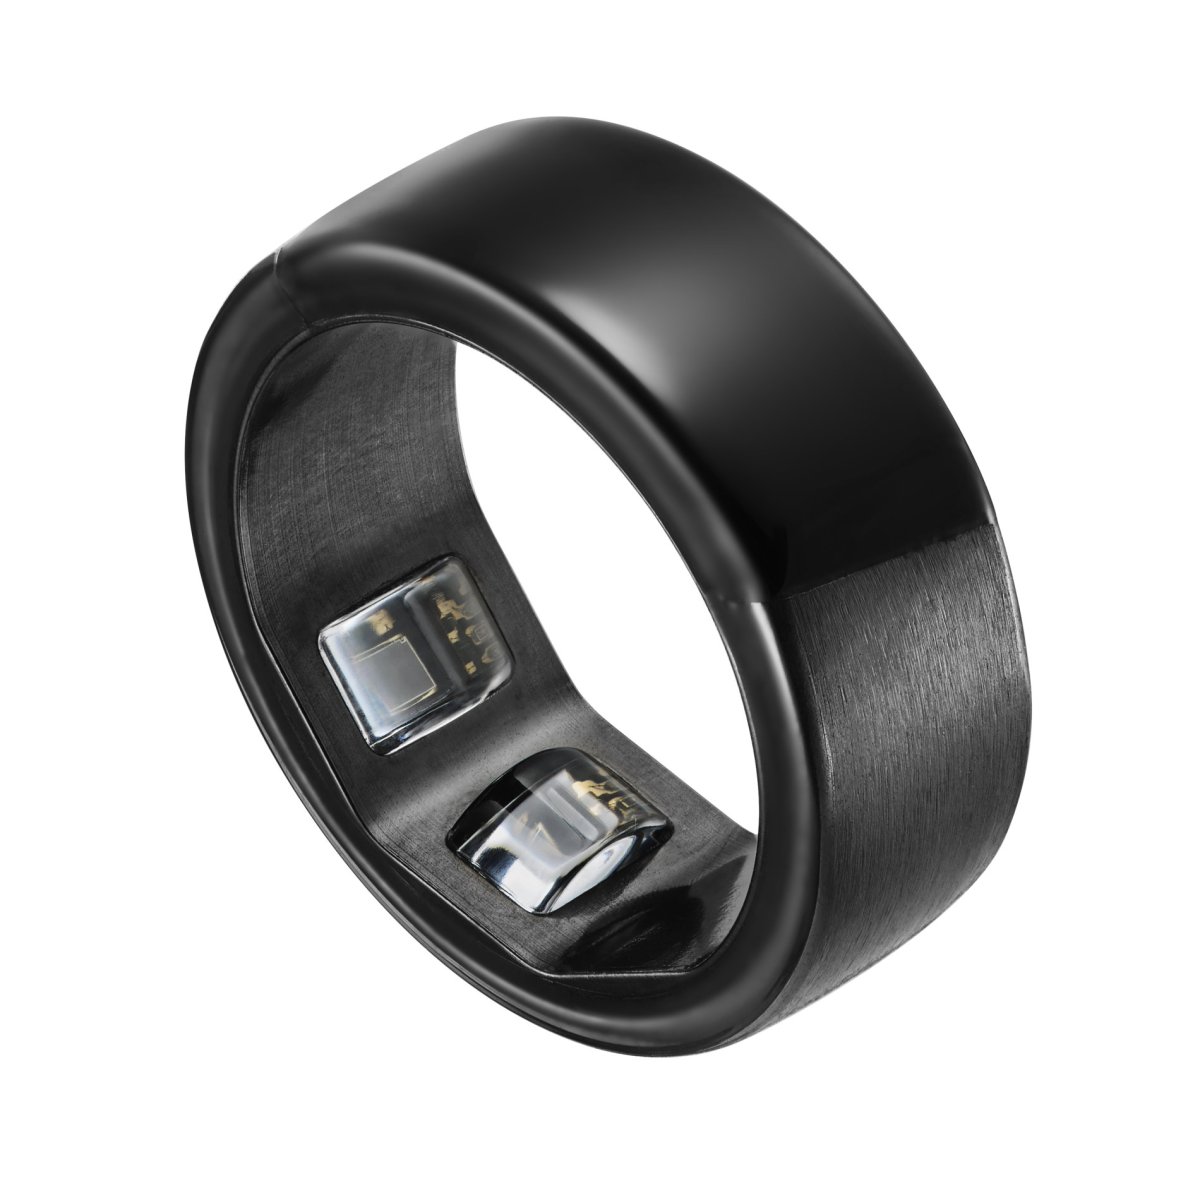 New iHeal Smart Ring promises blood pressure monitoring and up to 100 days  of battery life, launches at half price -  News